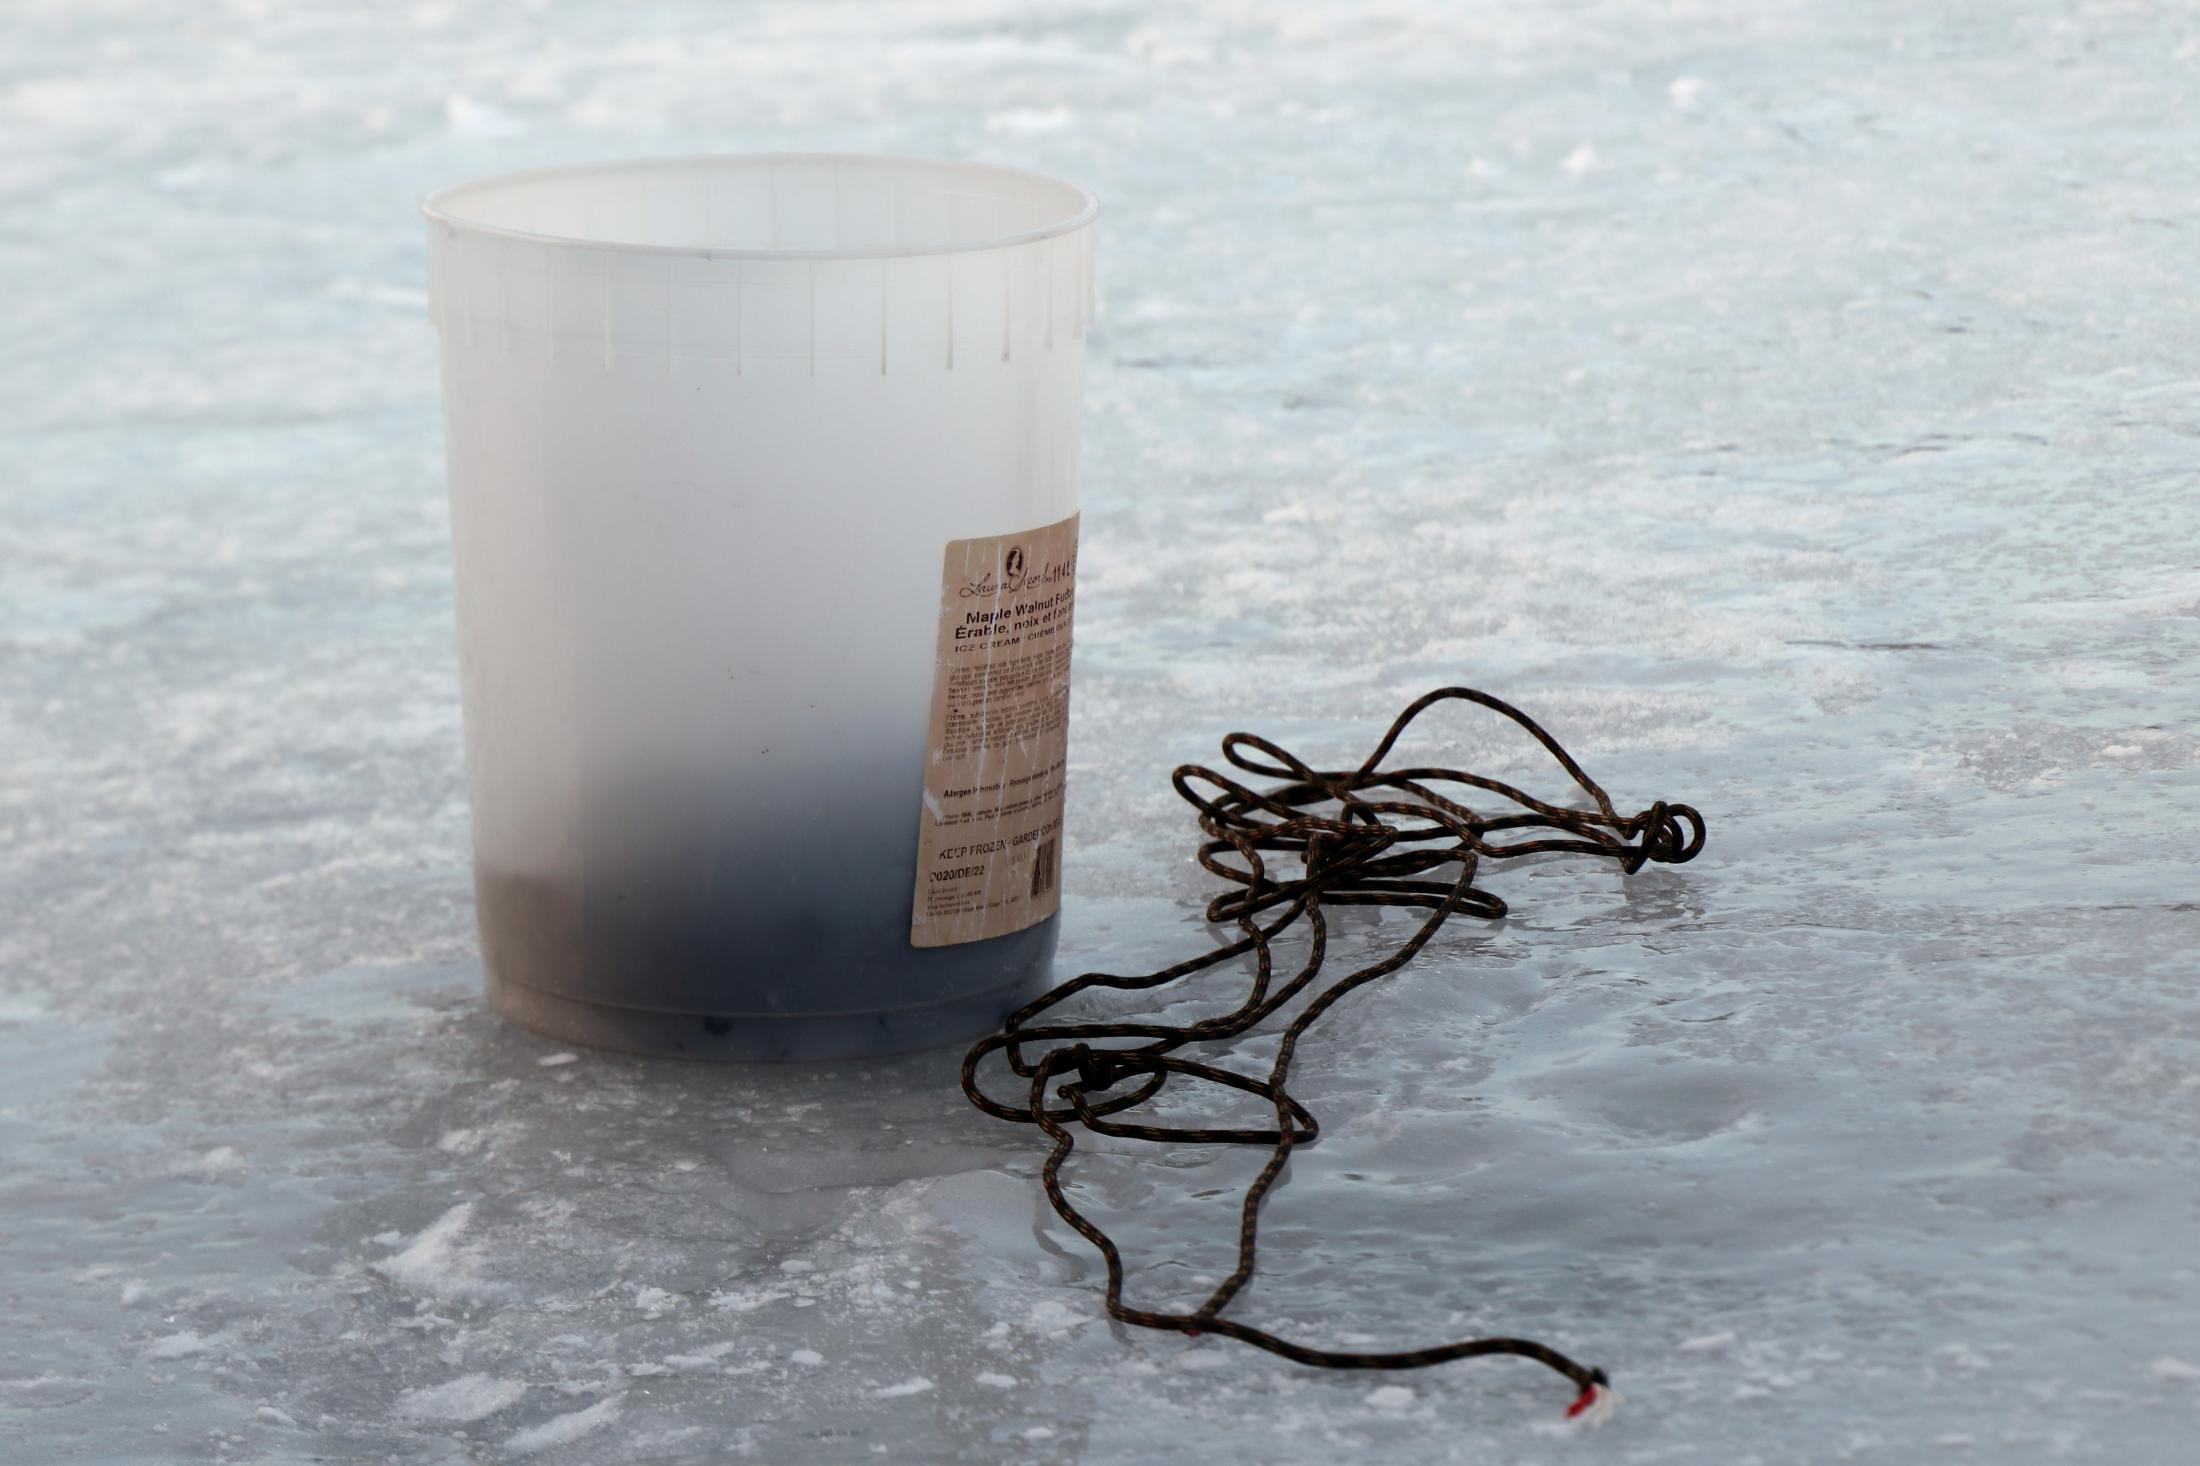 Morning on Ice - Kahnawake, MT - March 8, 2020: In the bucket tool, Diabo...